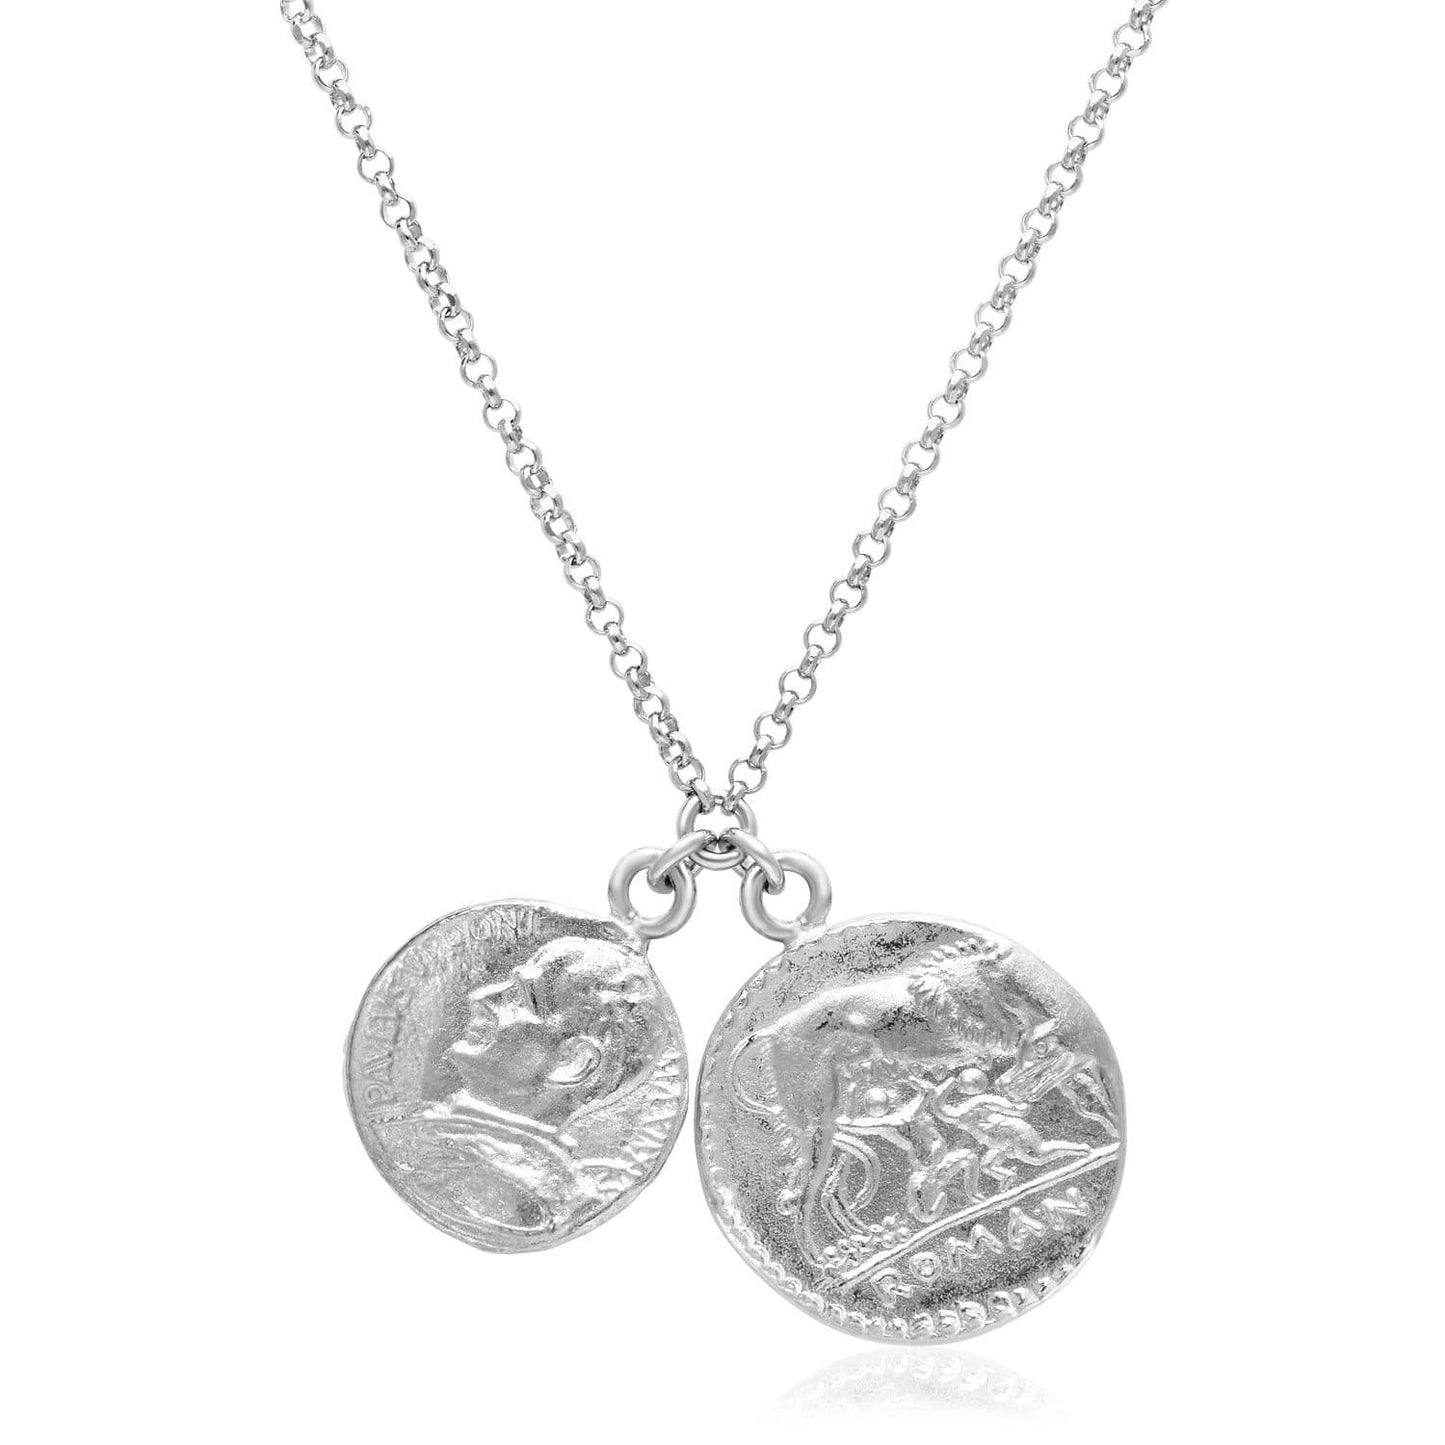 Sterling Silver 20 inch Necklace with Two Roman Coins